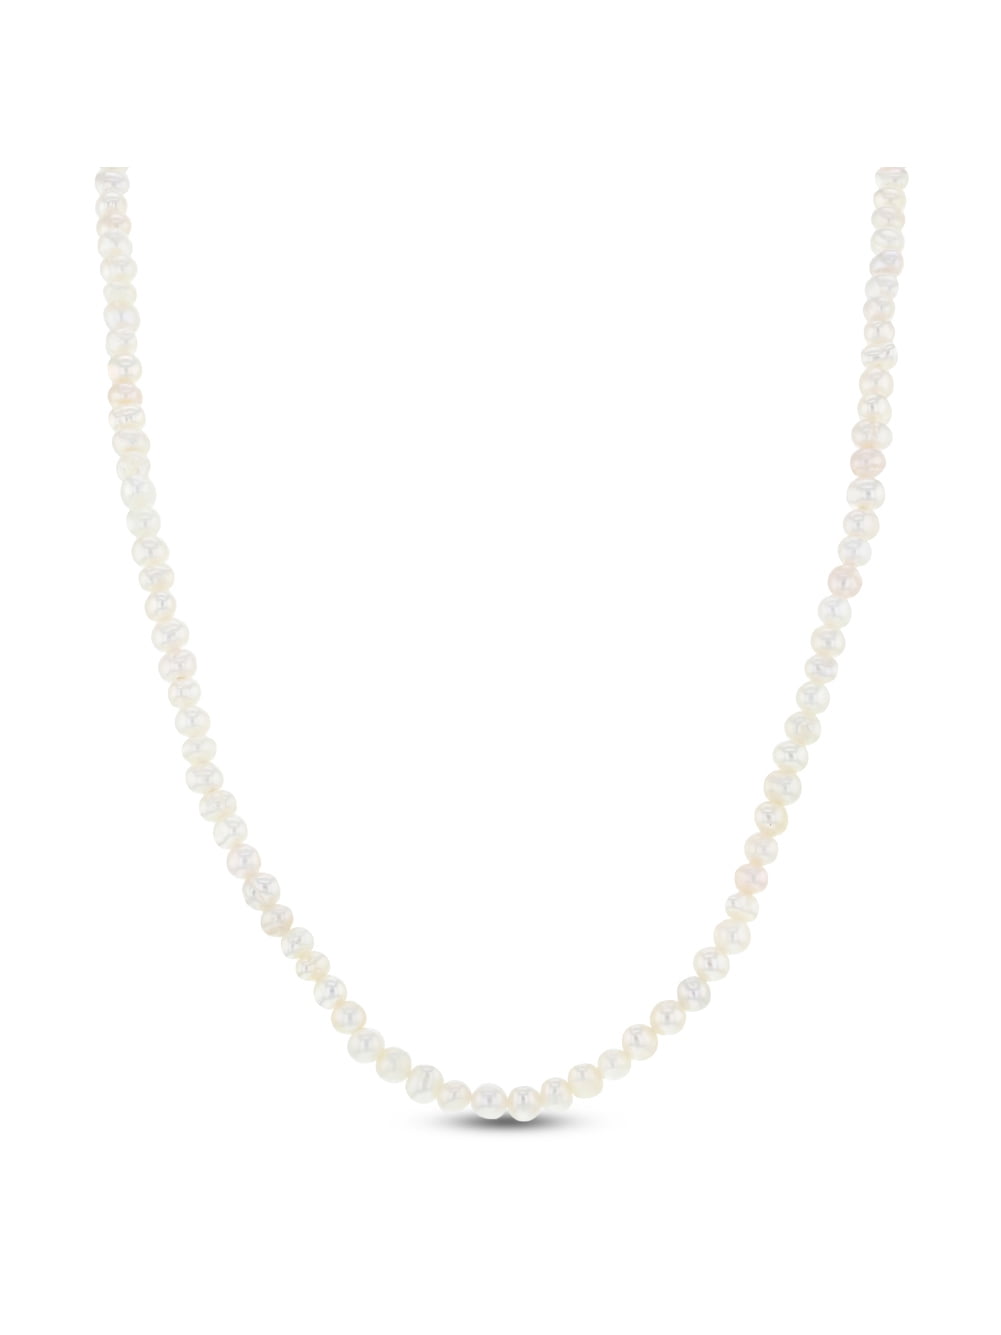 Baby freshwater pearl necklace – BESSEHA JEWELLERY